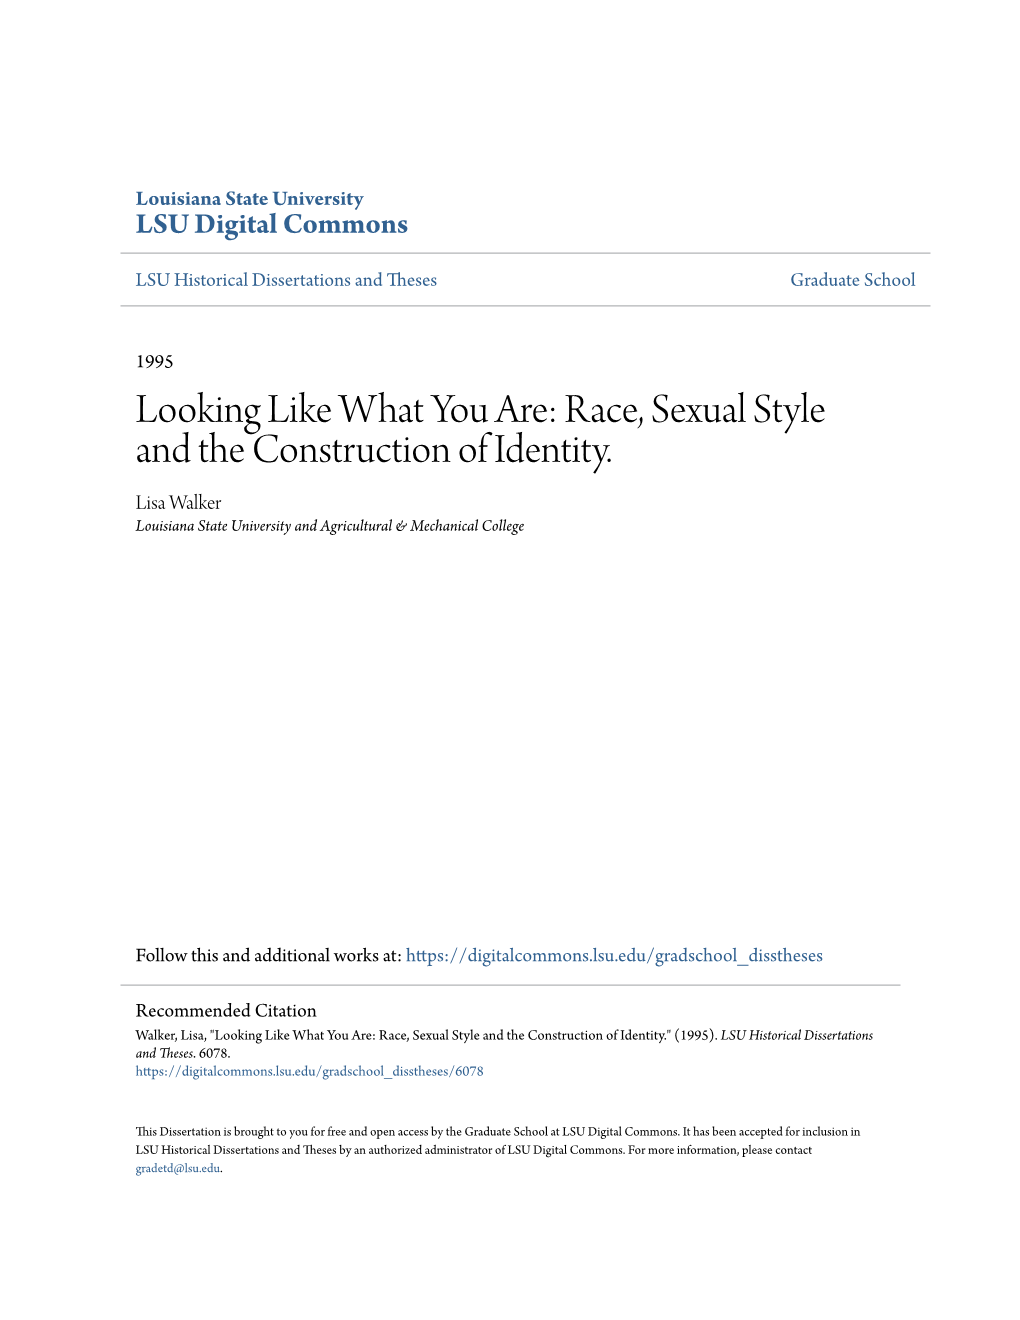 Race, Sexual Style and the Construction of Identity. Lisa Walker Louisiana State University and Agricultural & Mechanical College